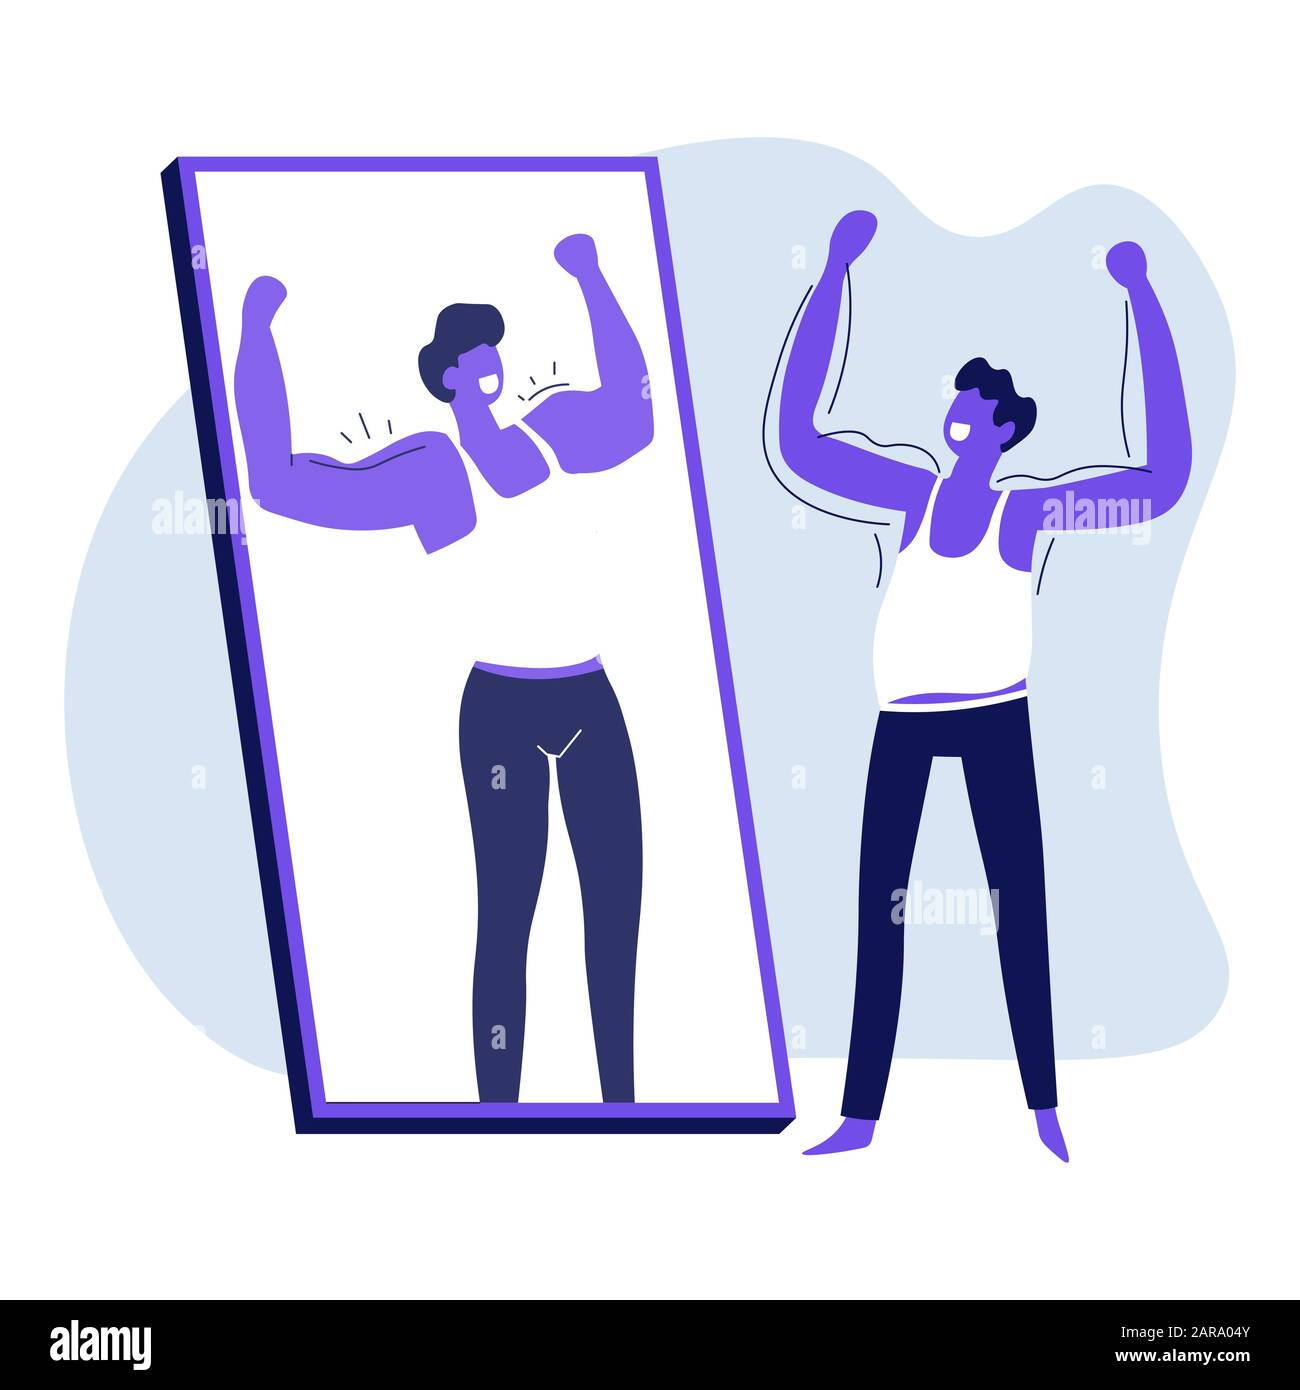 Mirror reflection, man dreaming about bodybuilder figure Stock Vector